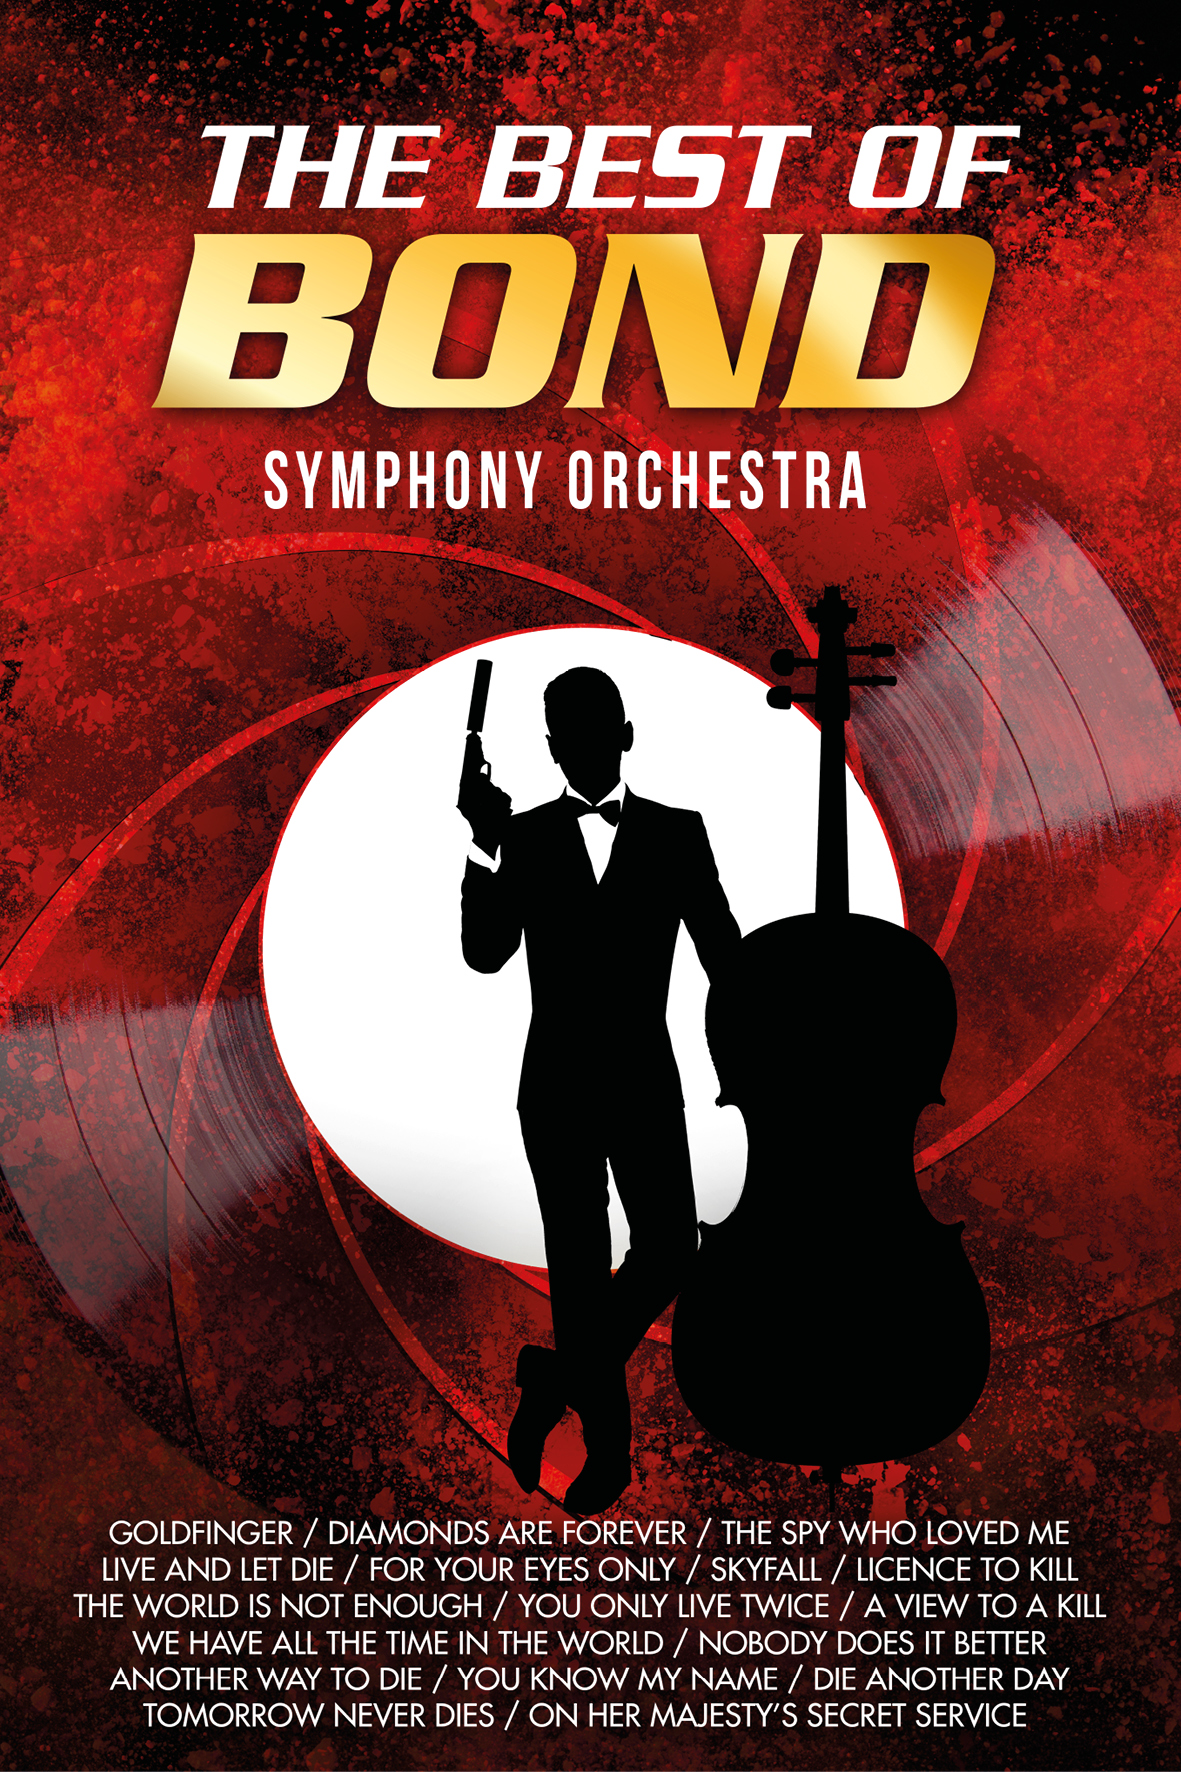 The best of James Bond cinema music presented in symphony orchestra arrangements.